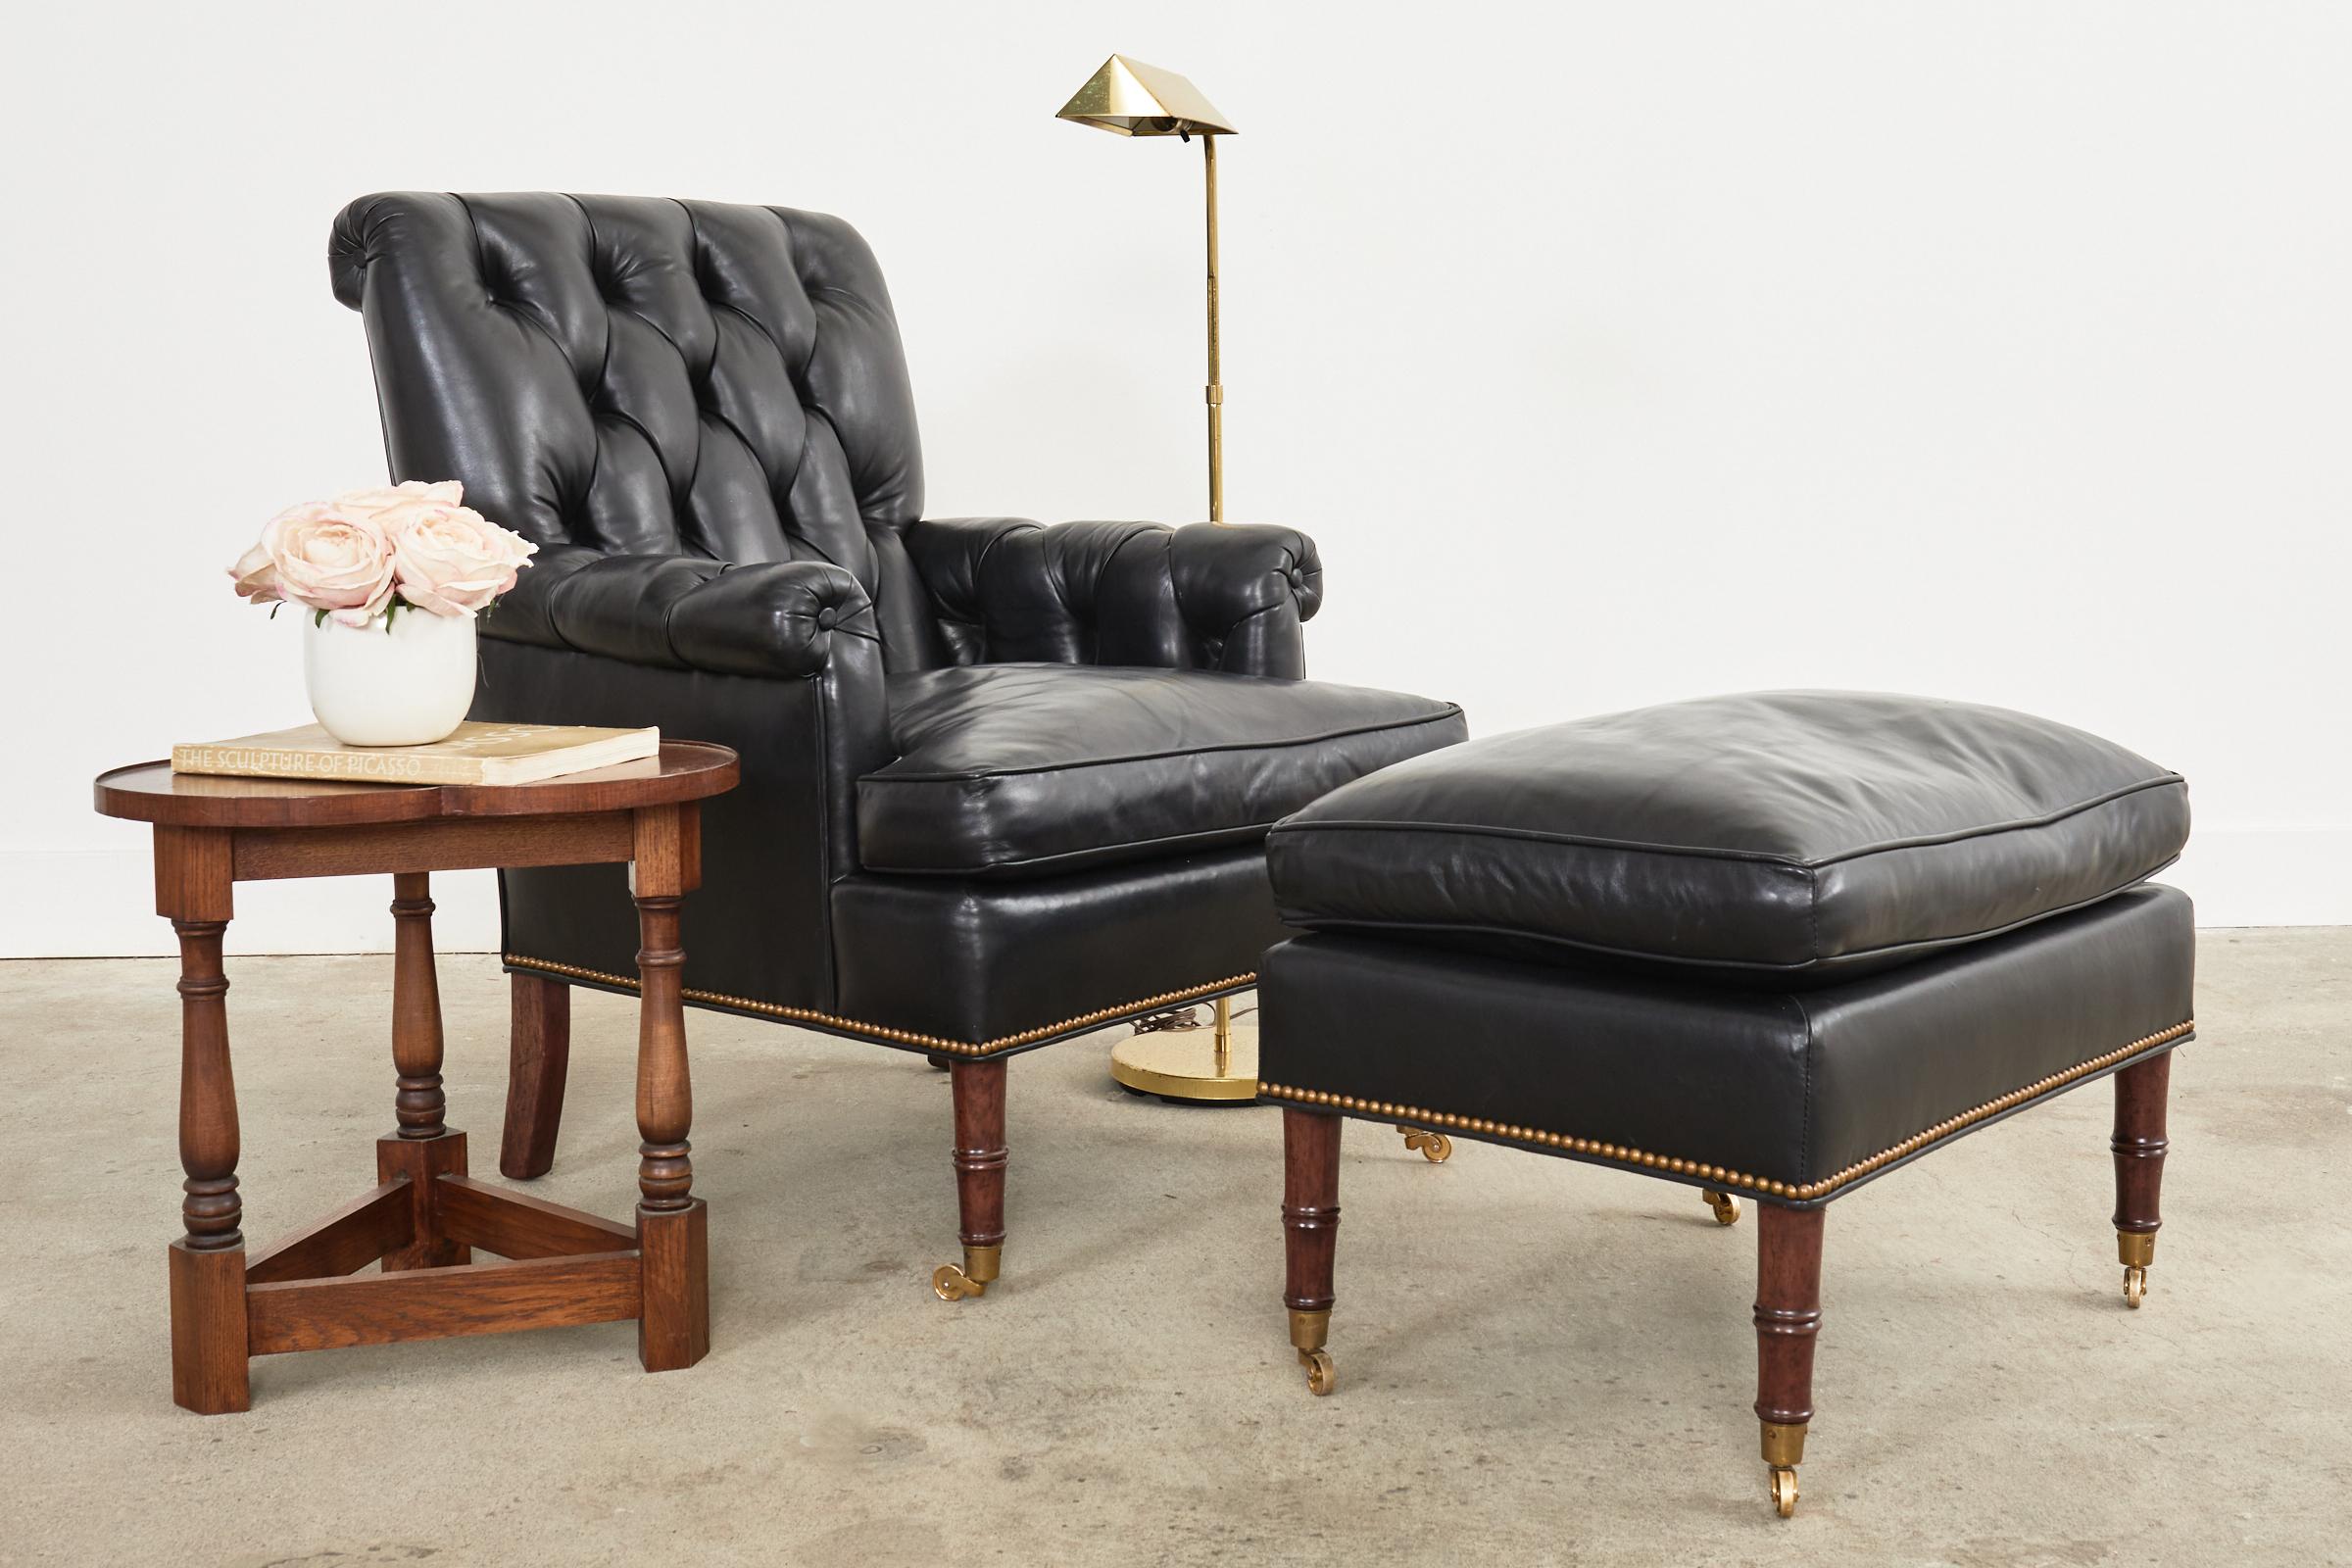 Handsome tufted black leather library armchair with matching ottoman. The chair features a walnut frame made in the regency taste with classic English rolled arms and a scrolled back. Covered with thick black leather hides having a tufted back and